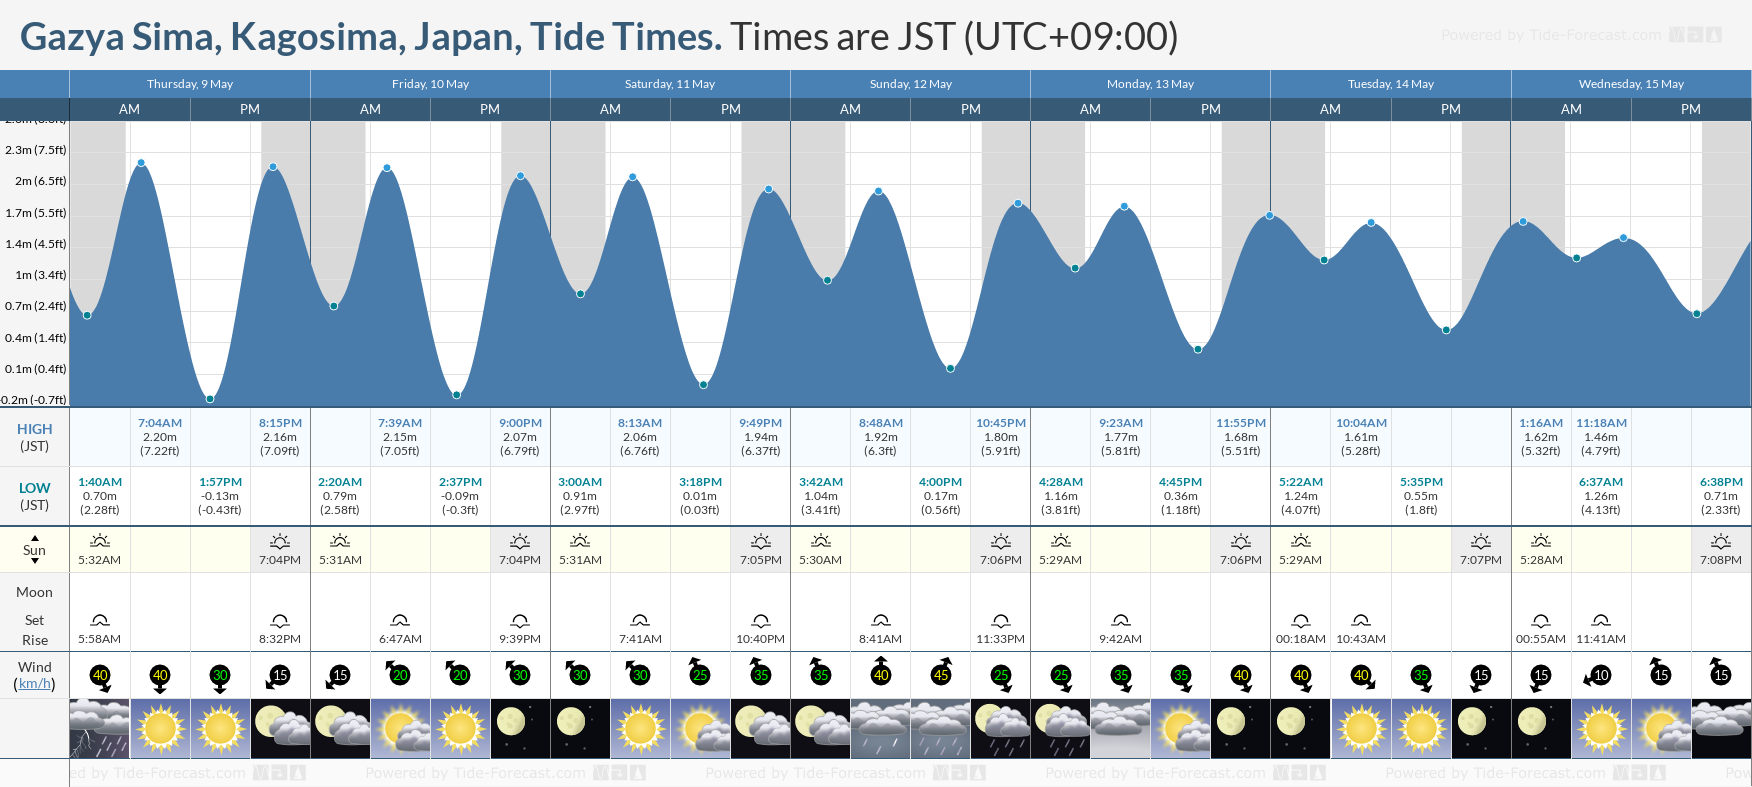 Gazya Sima, Kagosima, Japan Tide Chart including high and low tide tide times for the next 7 days